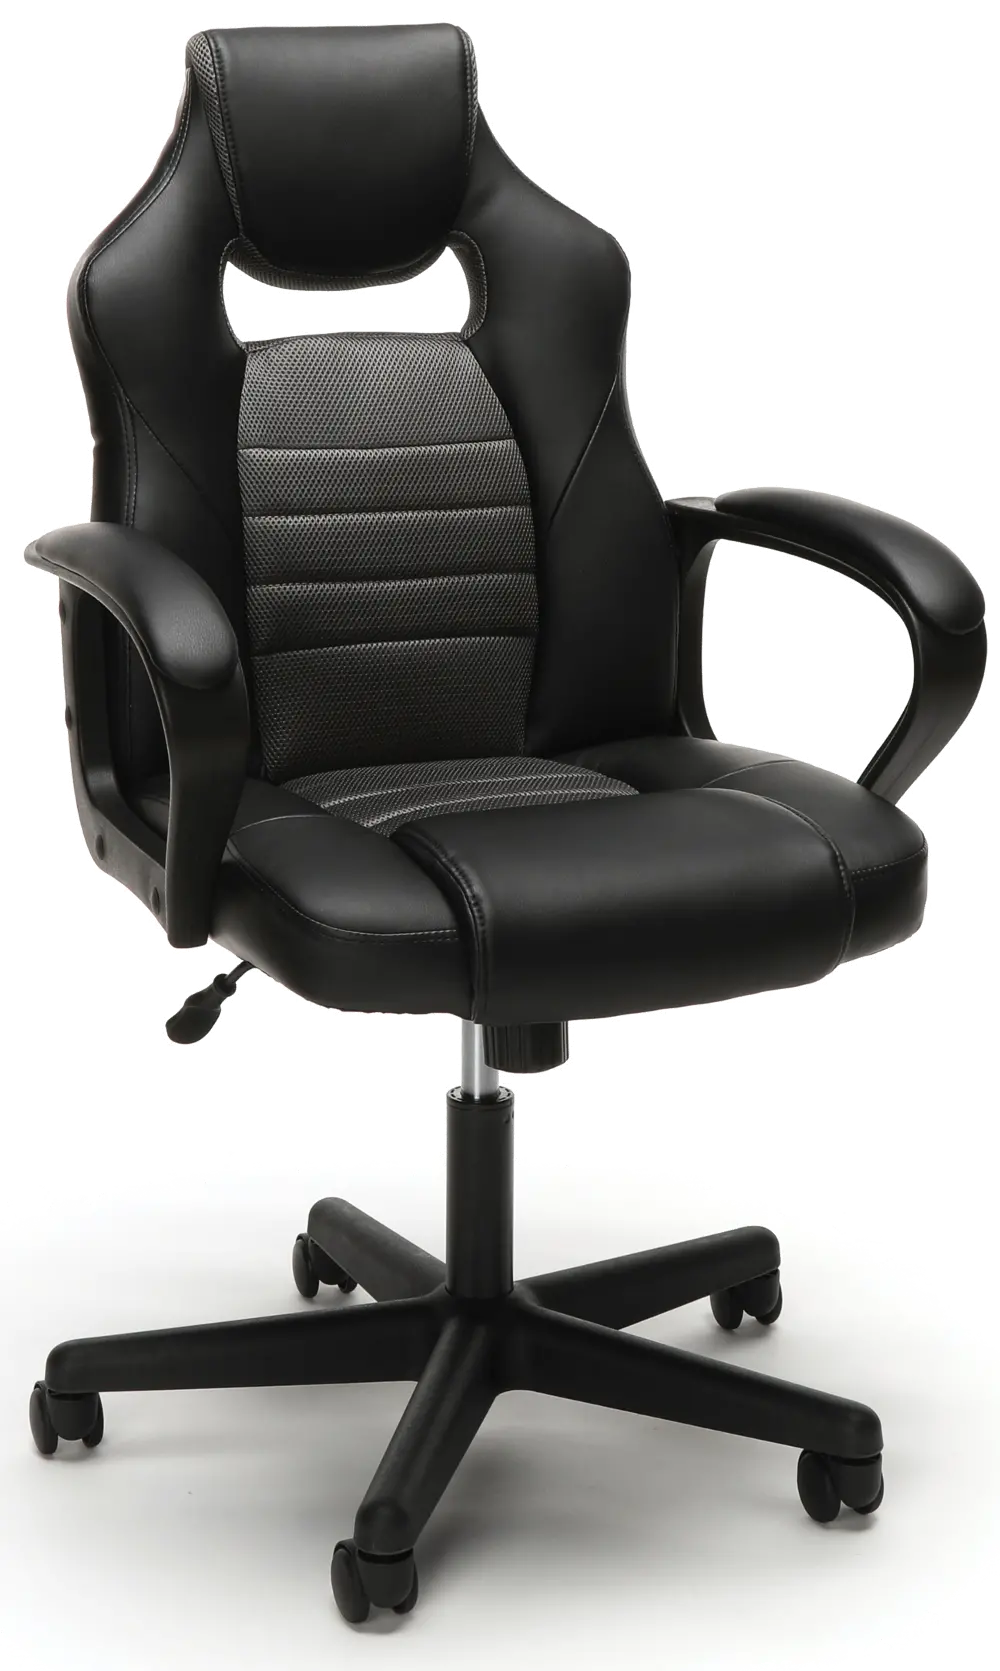 Gray and Black Racing Style Gaming Chair - Essentials-1